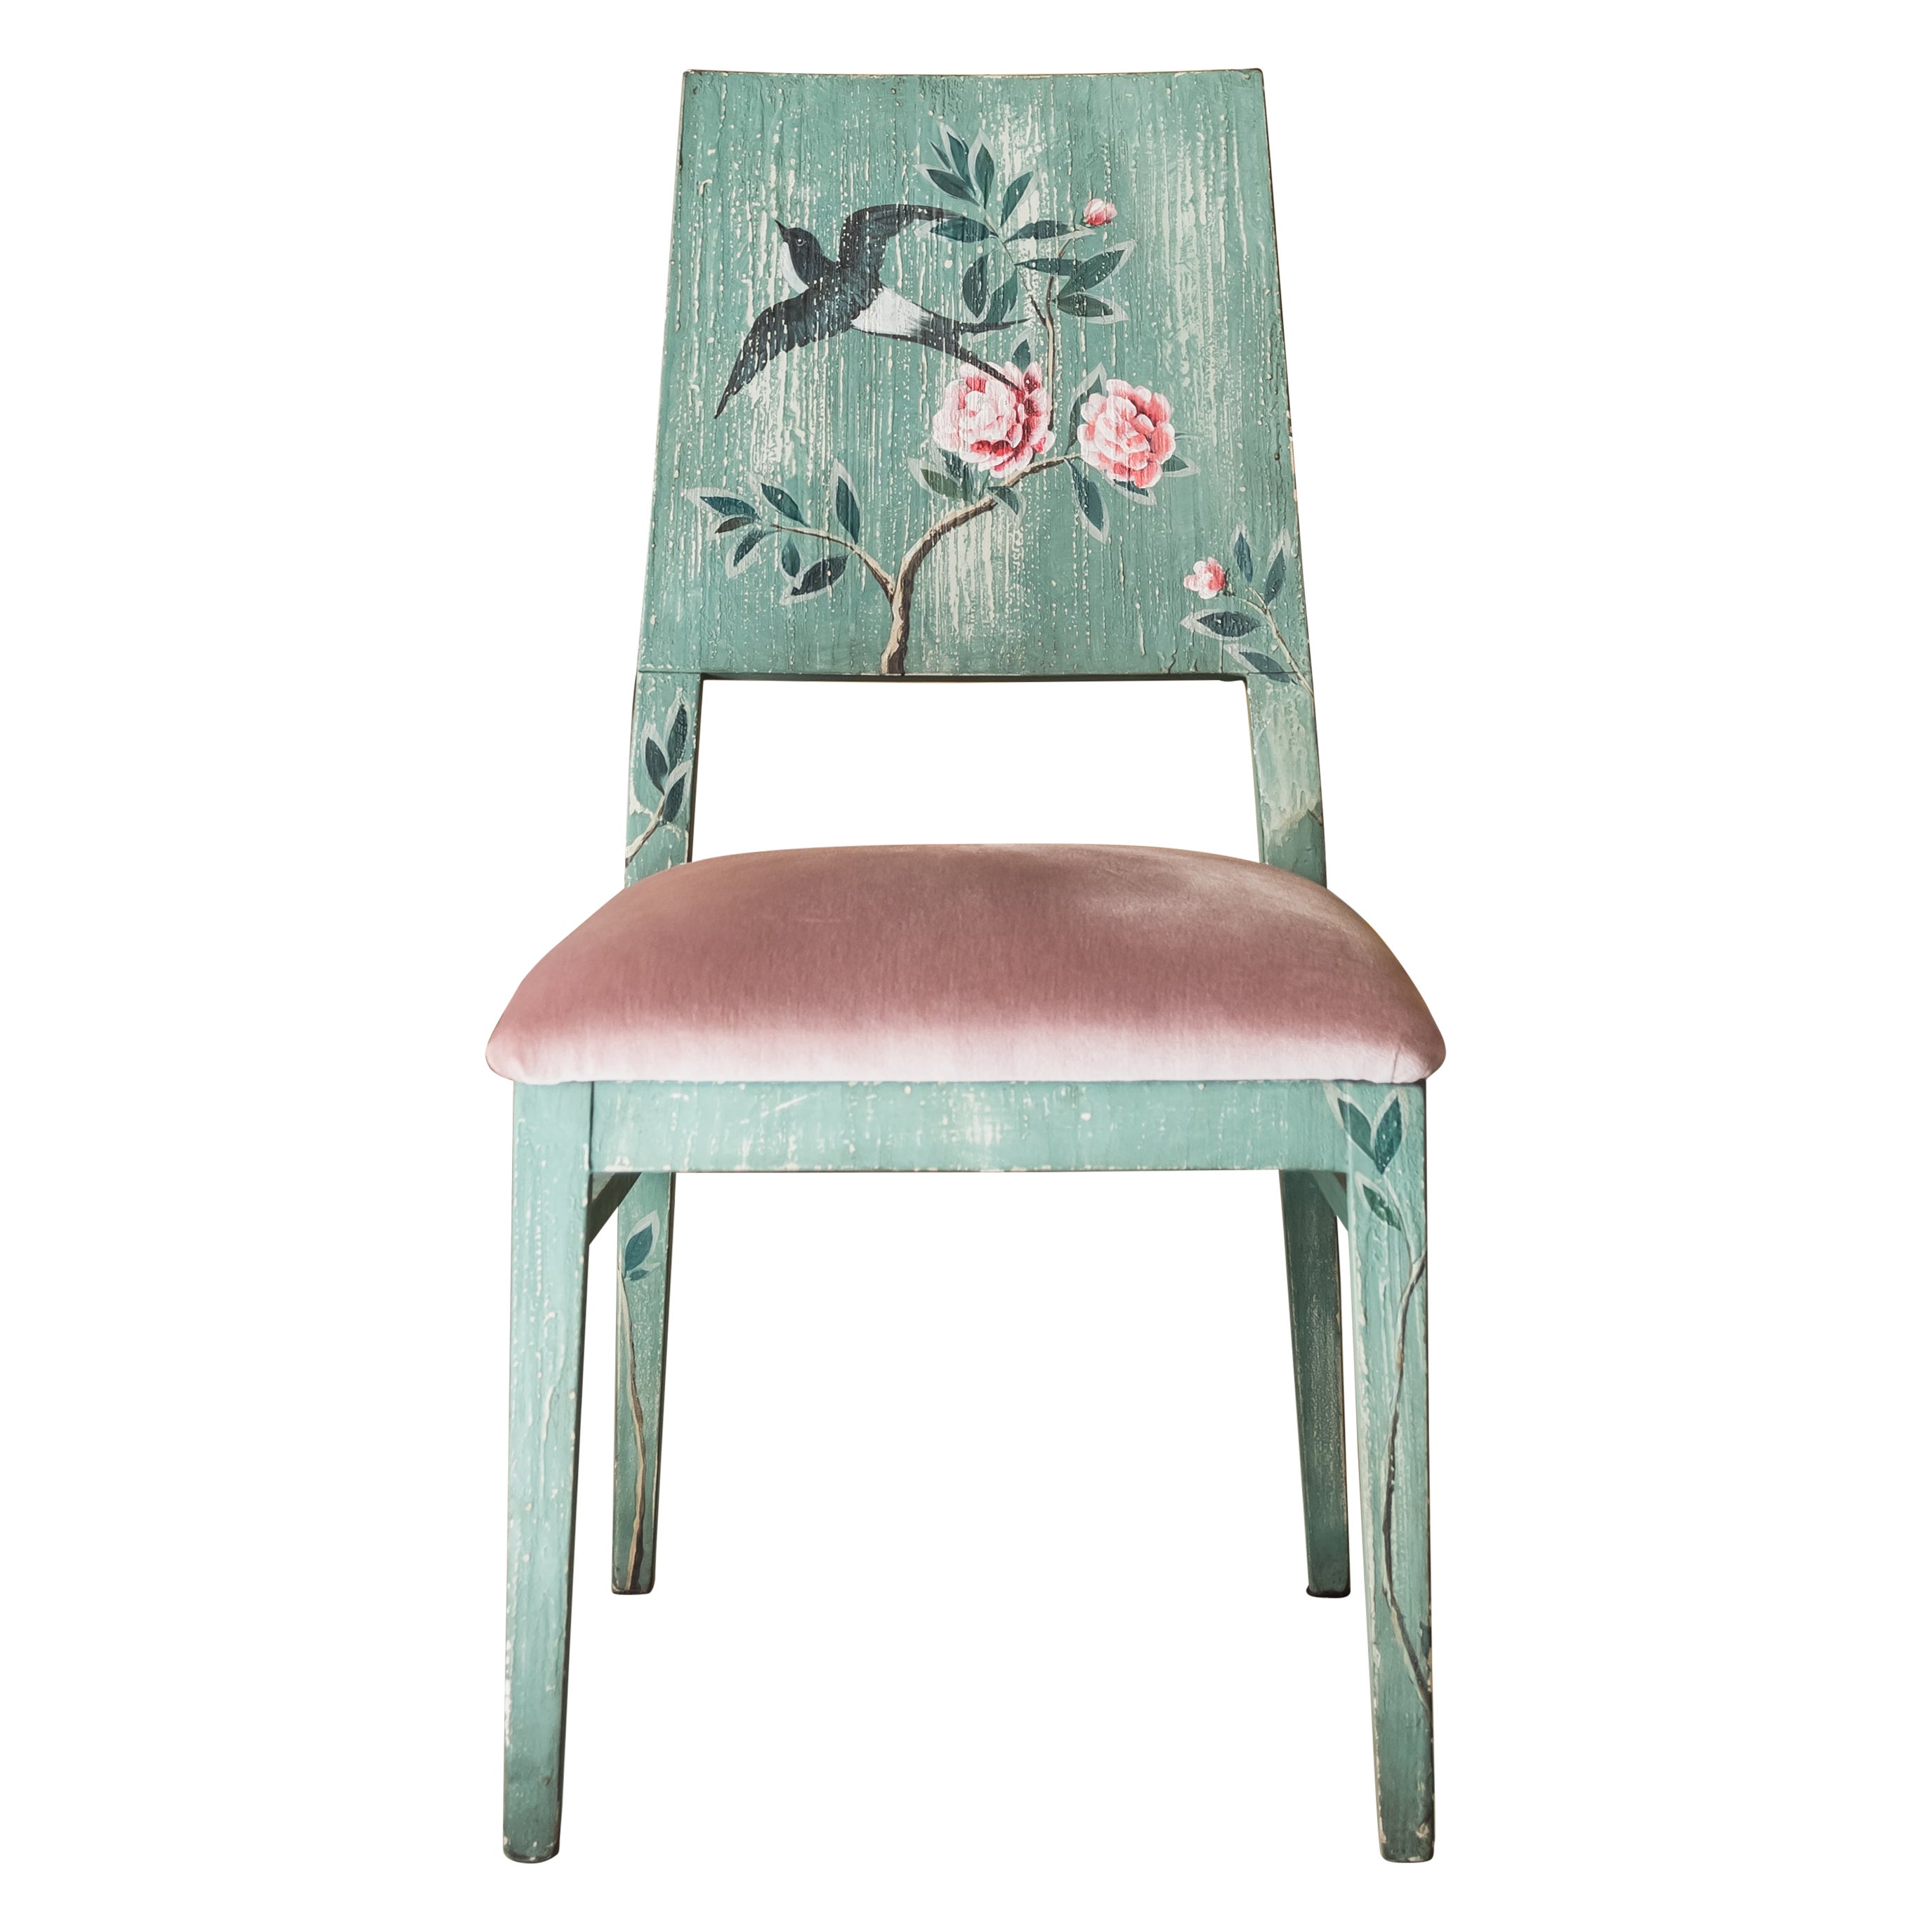 18th Century Hand Painted Venetian Green Indigo Dining Chair with Foliage